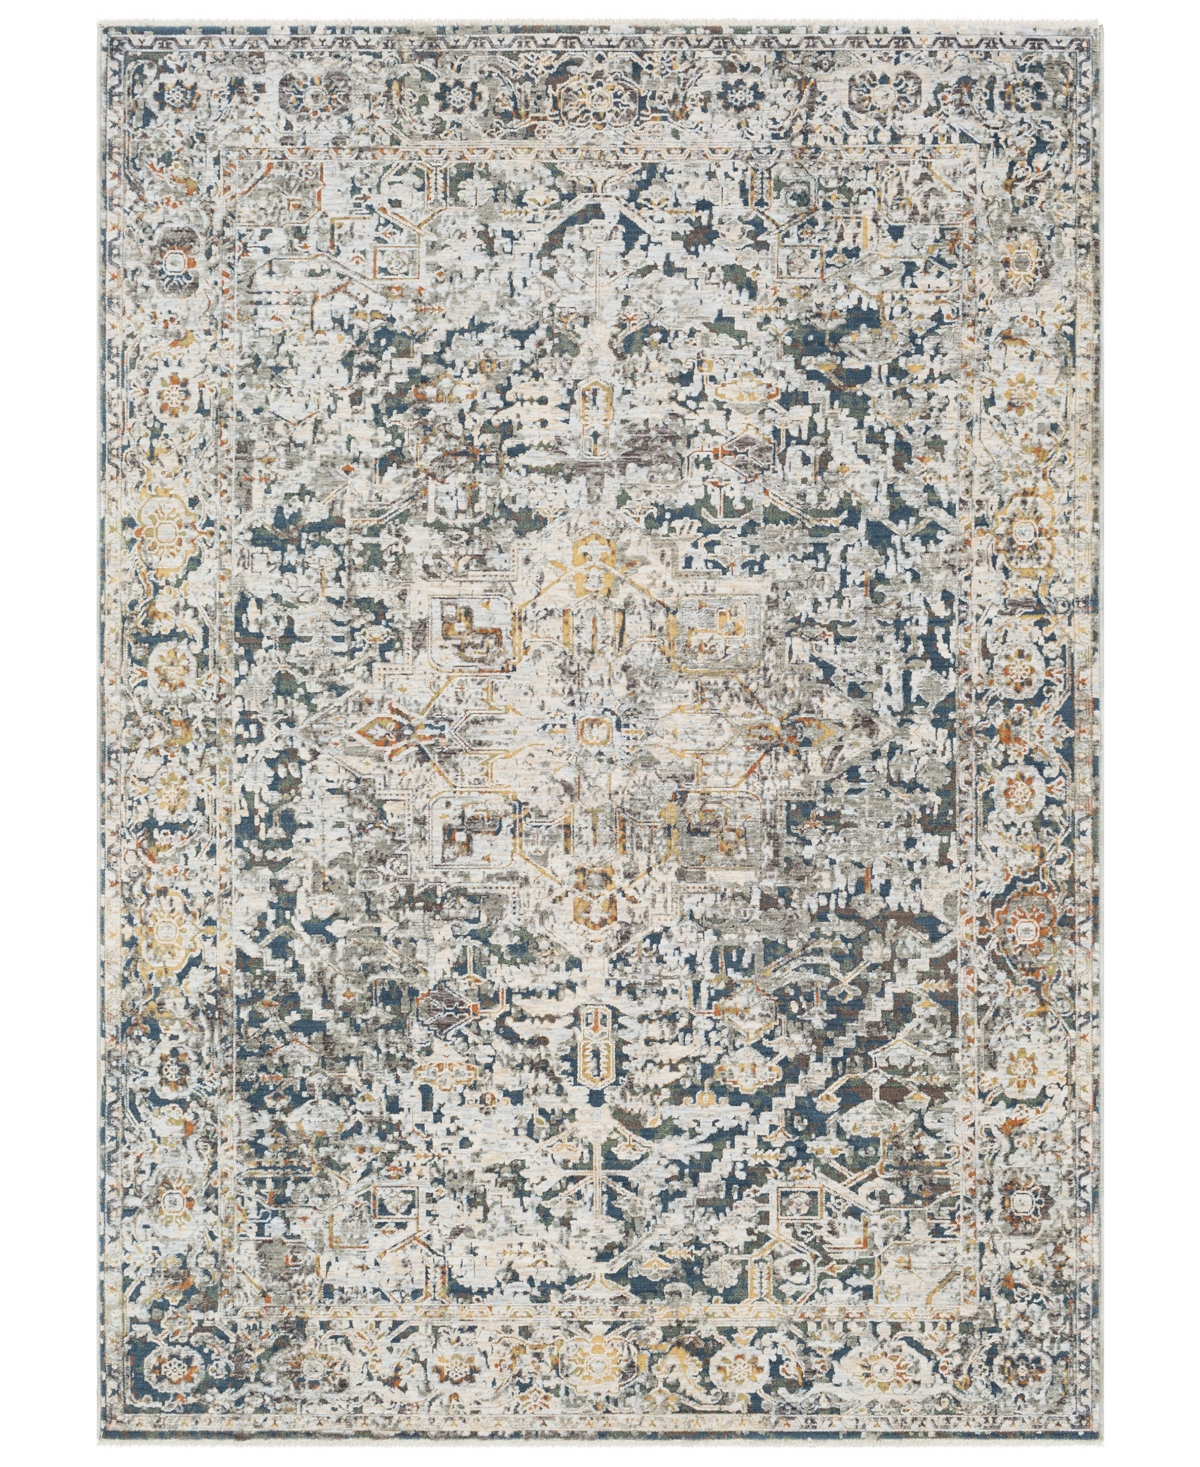 Surya Presidential Pdt-2300 Pale Blue 3'3in x 5' Area Rug - Pale Blue